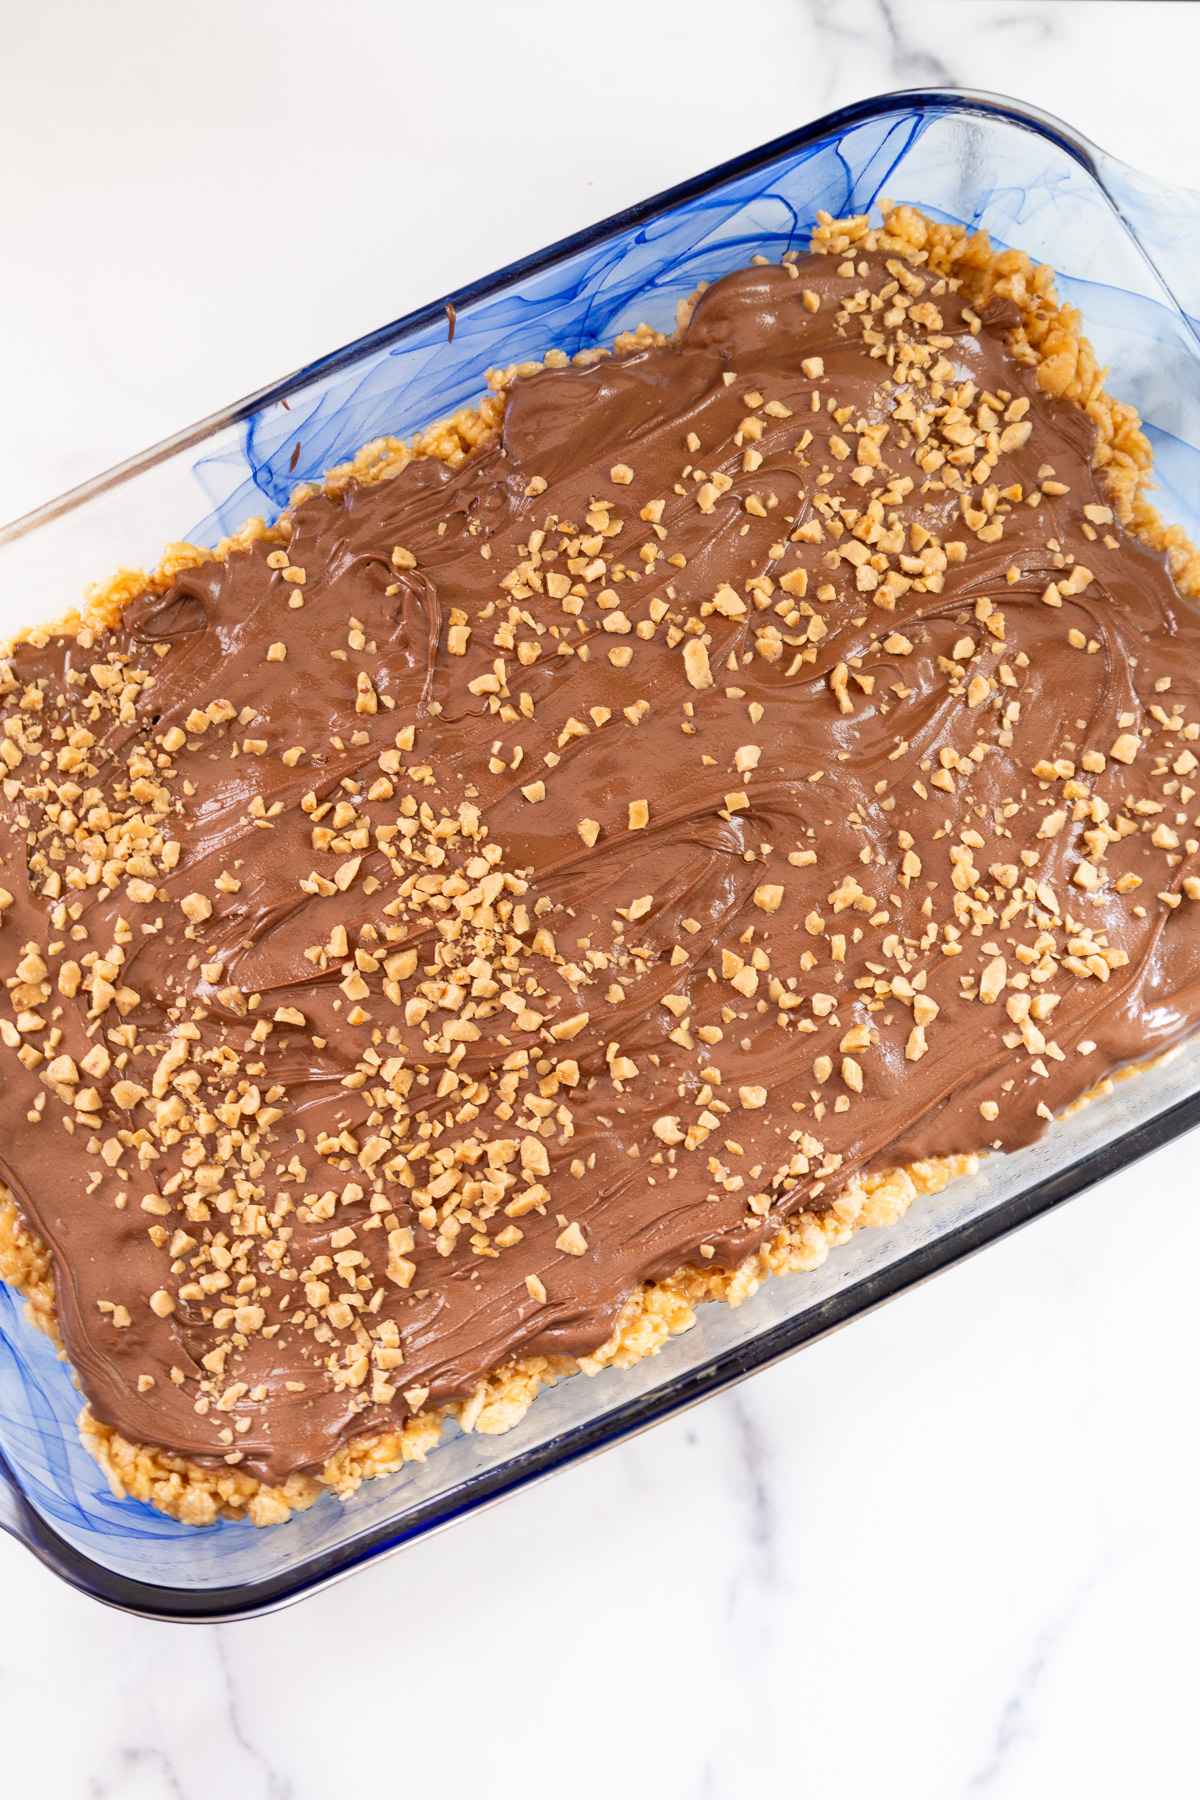 Treat bars in 9x13 pan with chocolate mixture spread over top and sprinkled with toffee bits.